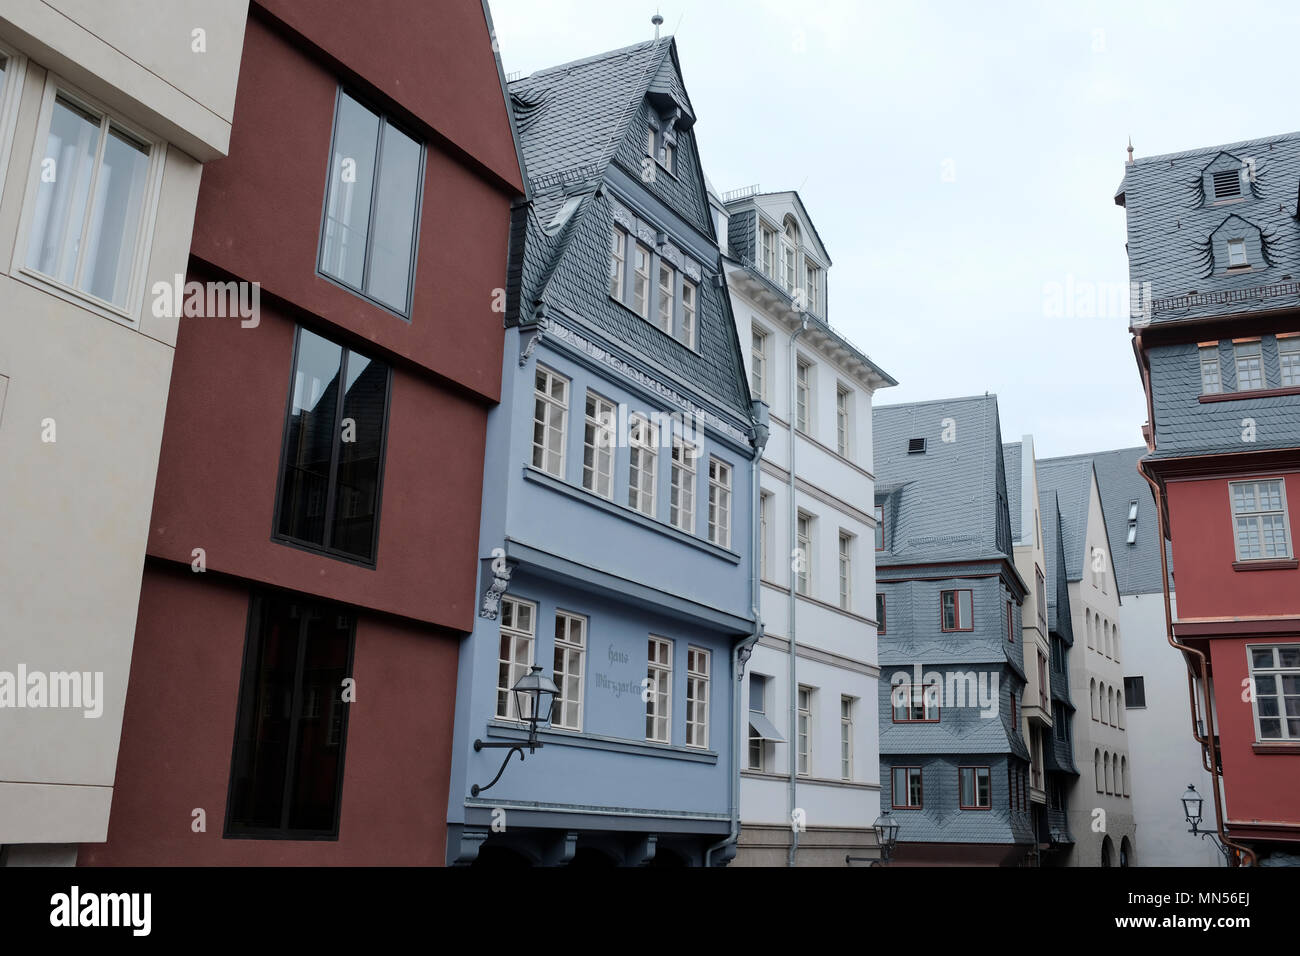 Housefronts in Frankfurt am Main, Germany. The historical quarter is part of the former city centre (Altstadt), reconstructed in the so-called Dom-RÃ¶ Stock Photo